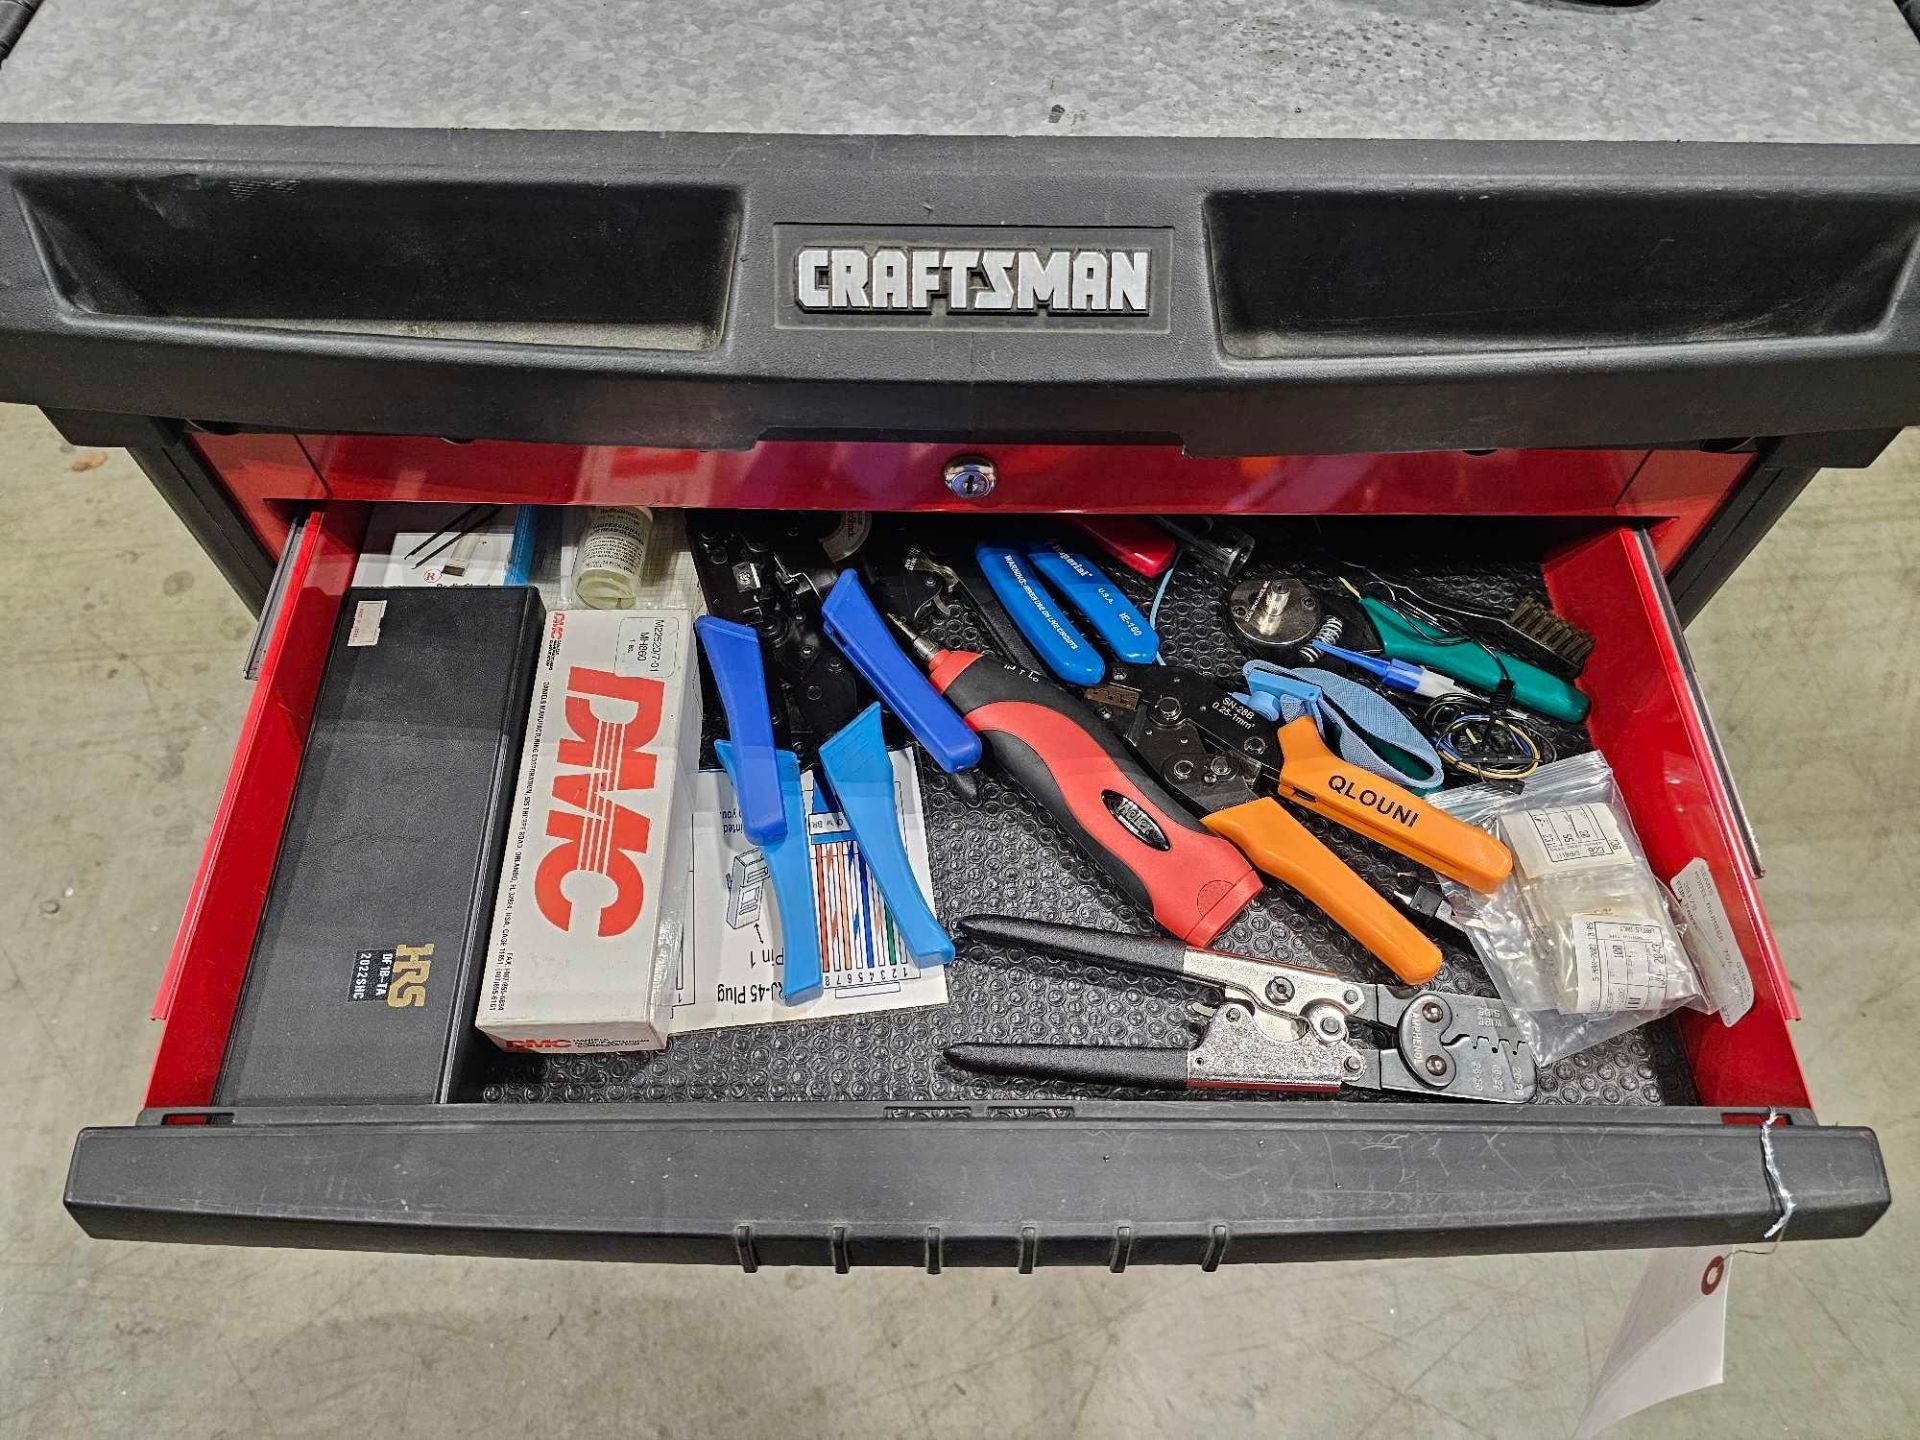 CRAFTSMAN TOOL CABINET WITH ELECTRICAL TOOLS - Image 5 of 14